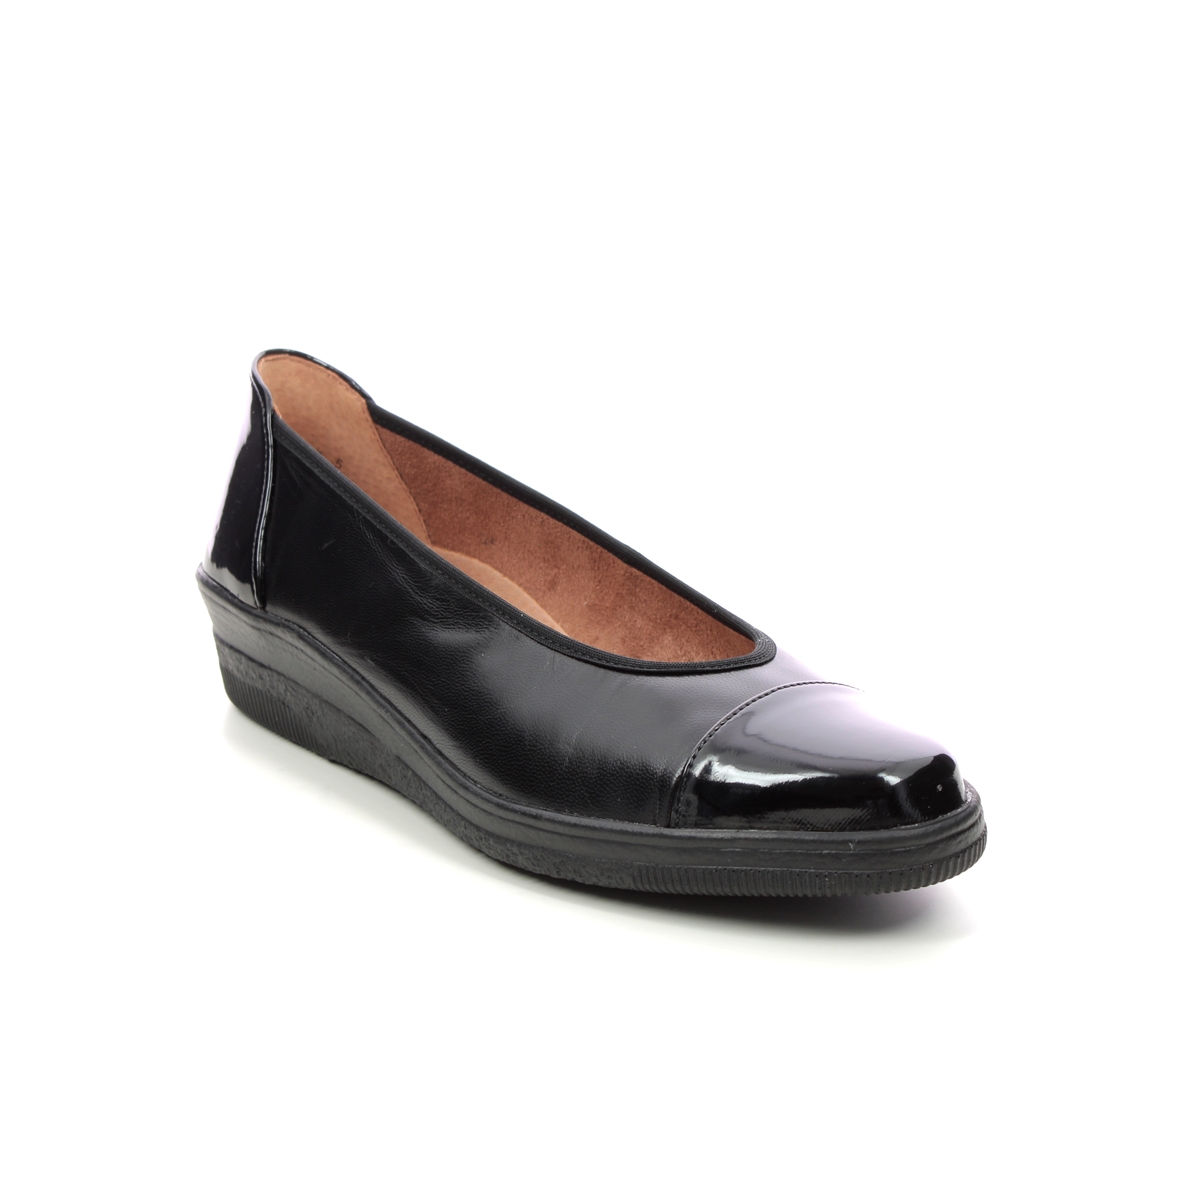 Gabor Petunia Black Patent Leather Womens Comfort Slip On Shoes 06.402.37 In Size 3.5 In Plain Black Patent Leather  Womens Comfort Slip On Shoes In S